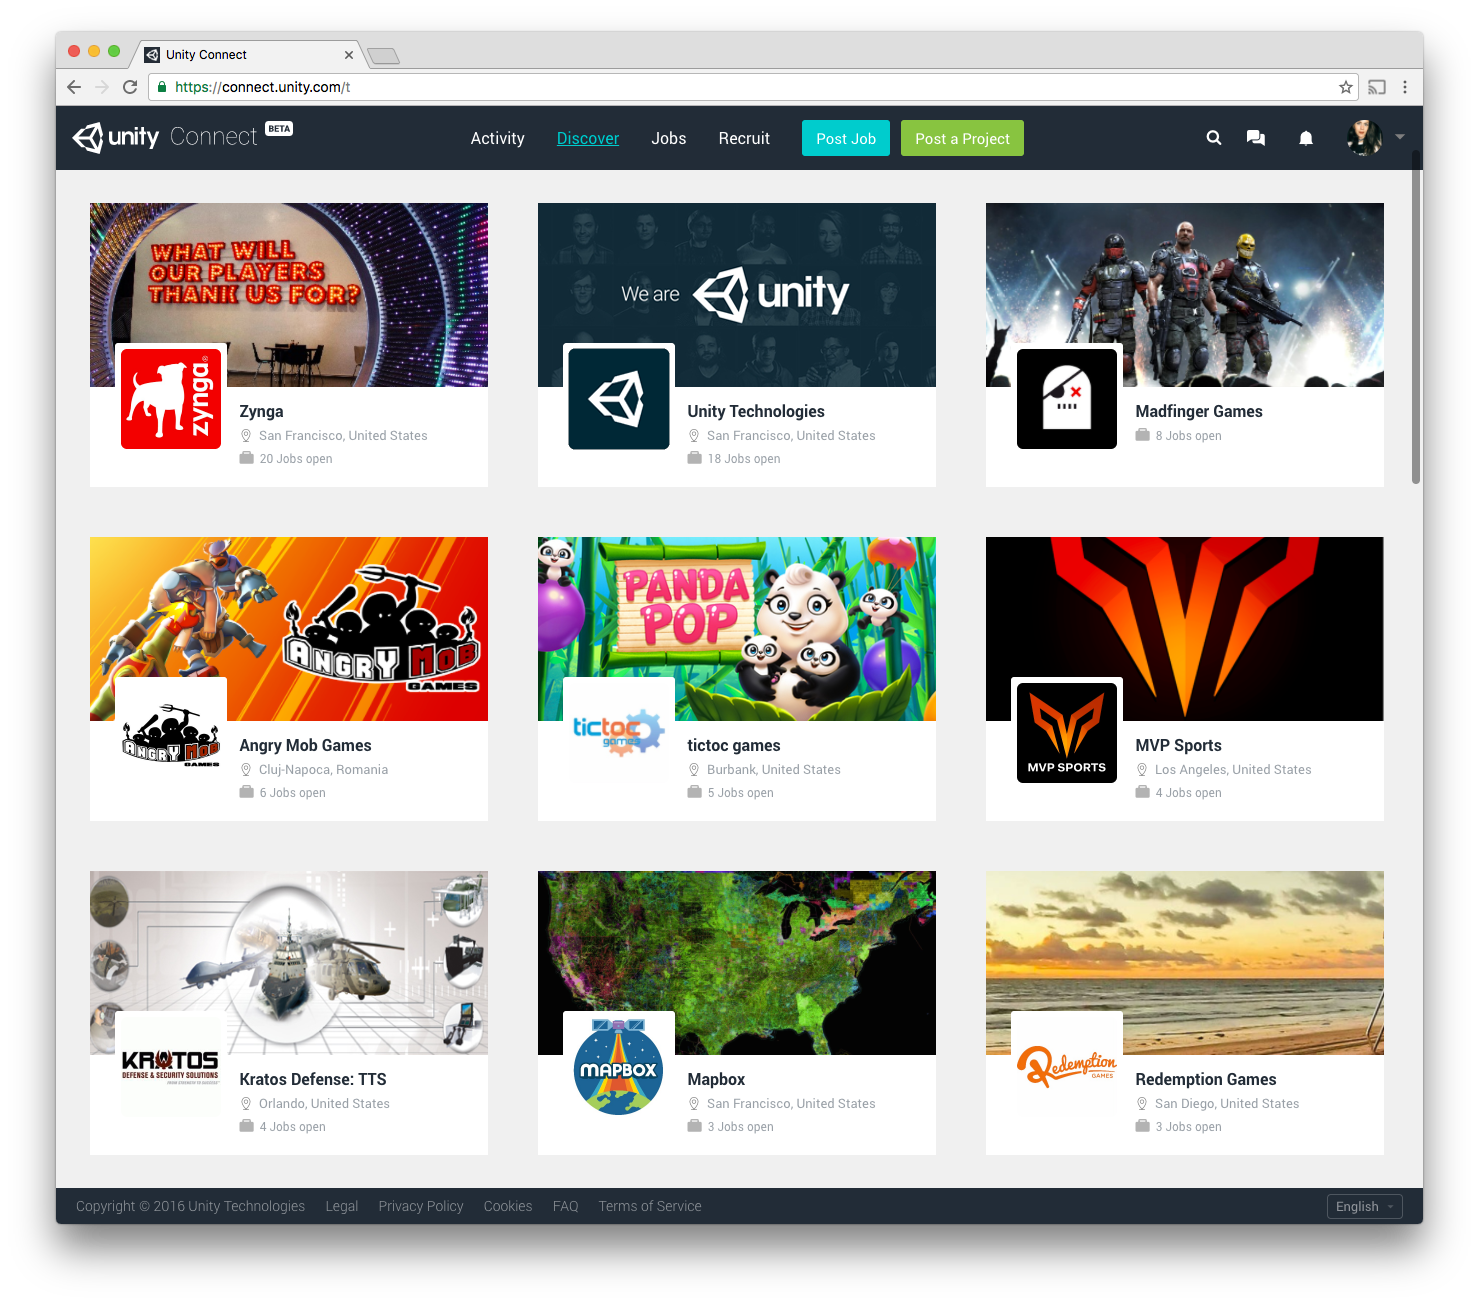 Over 230 companies have listed jobs on Unity Connect